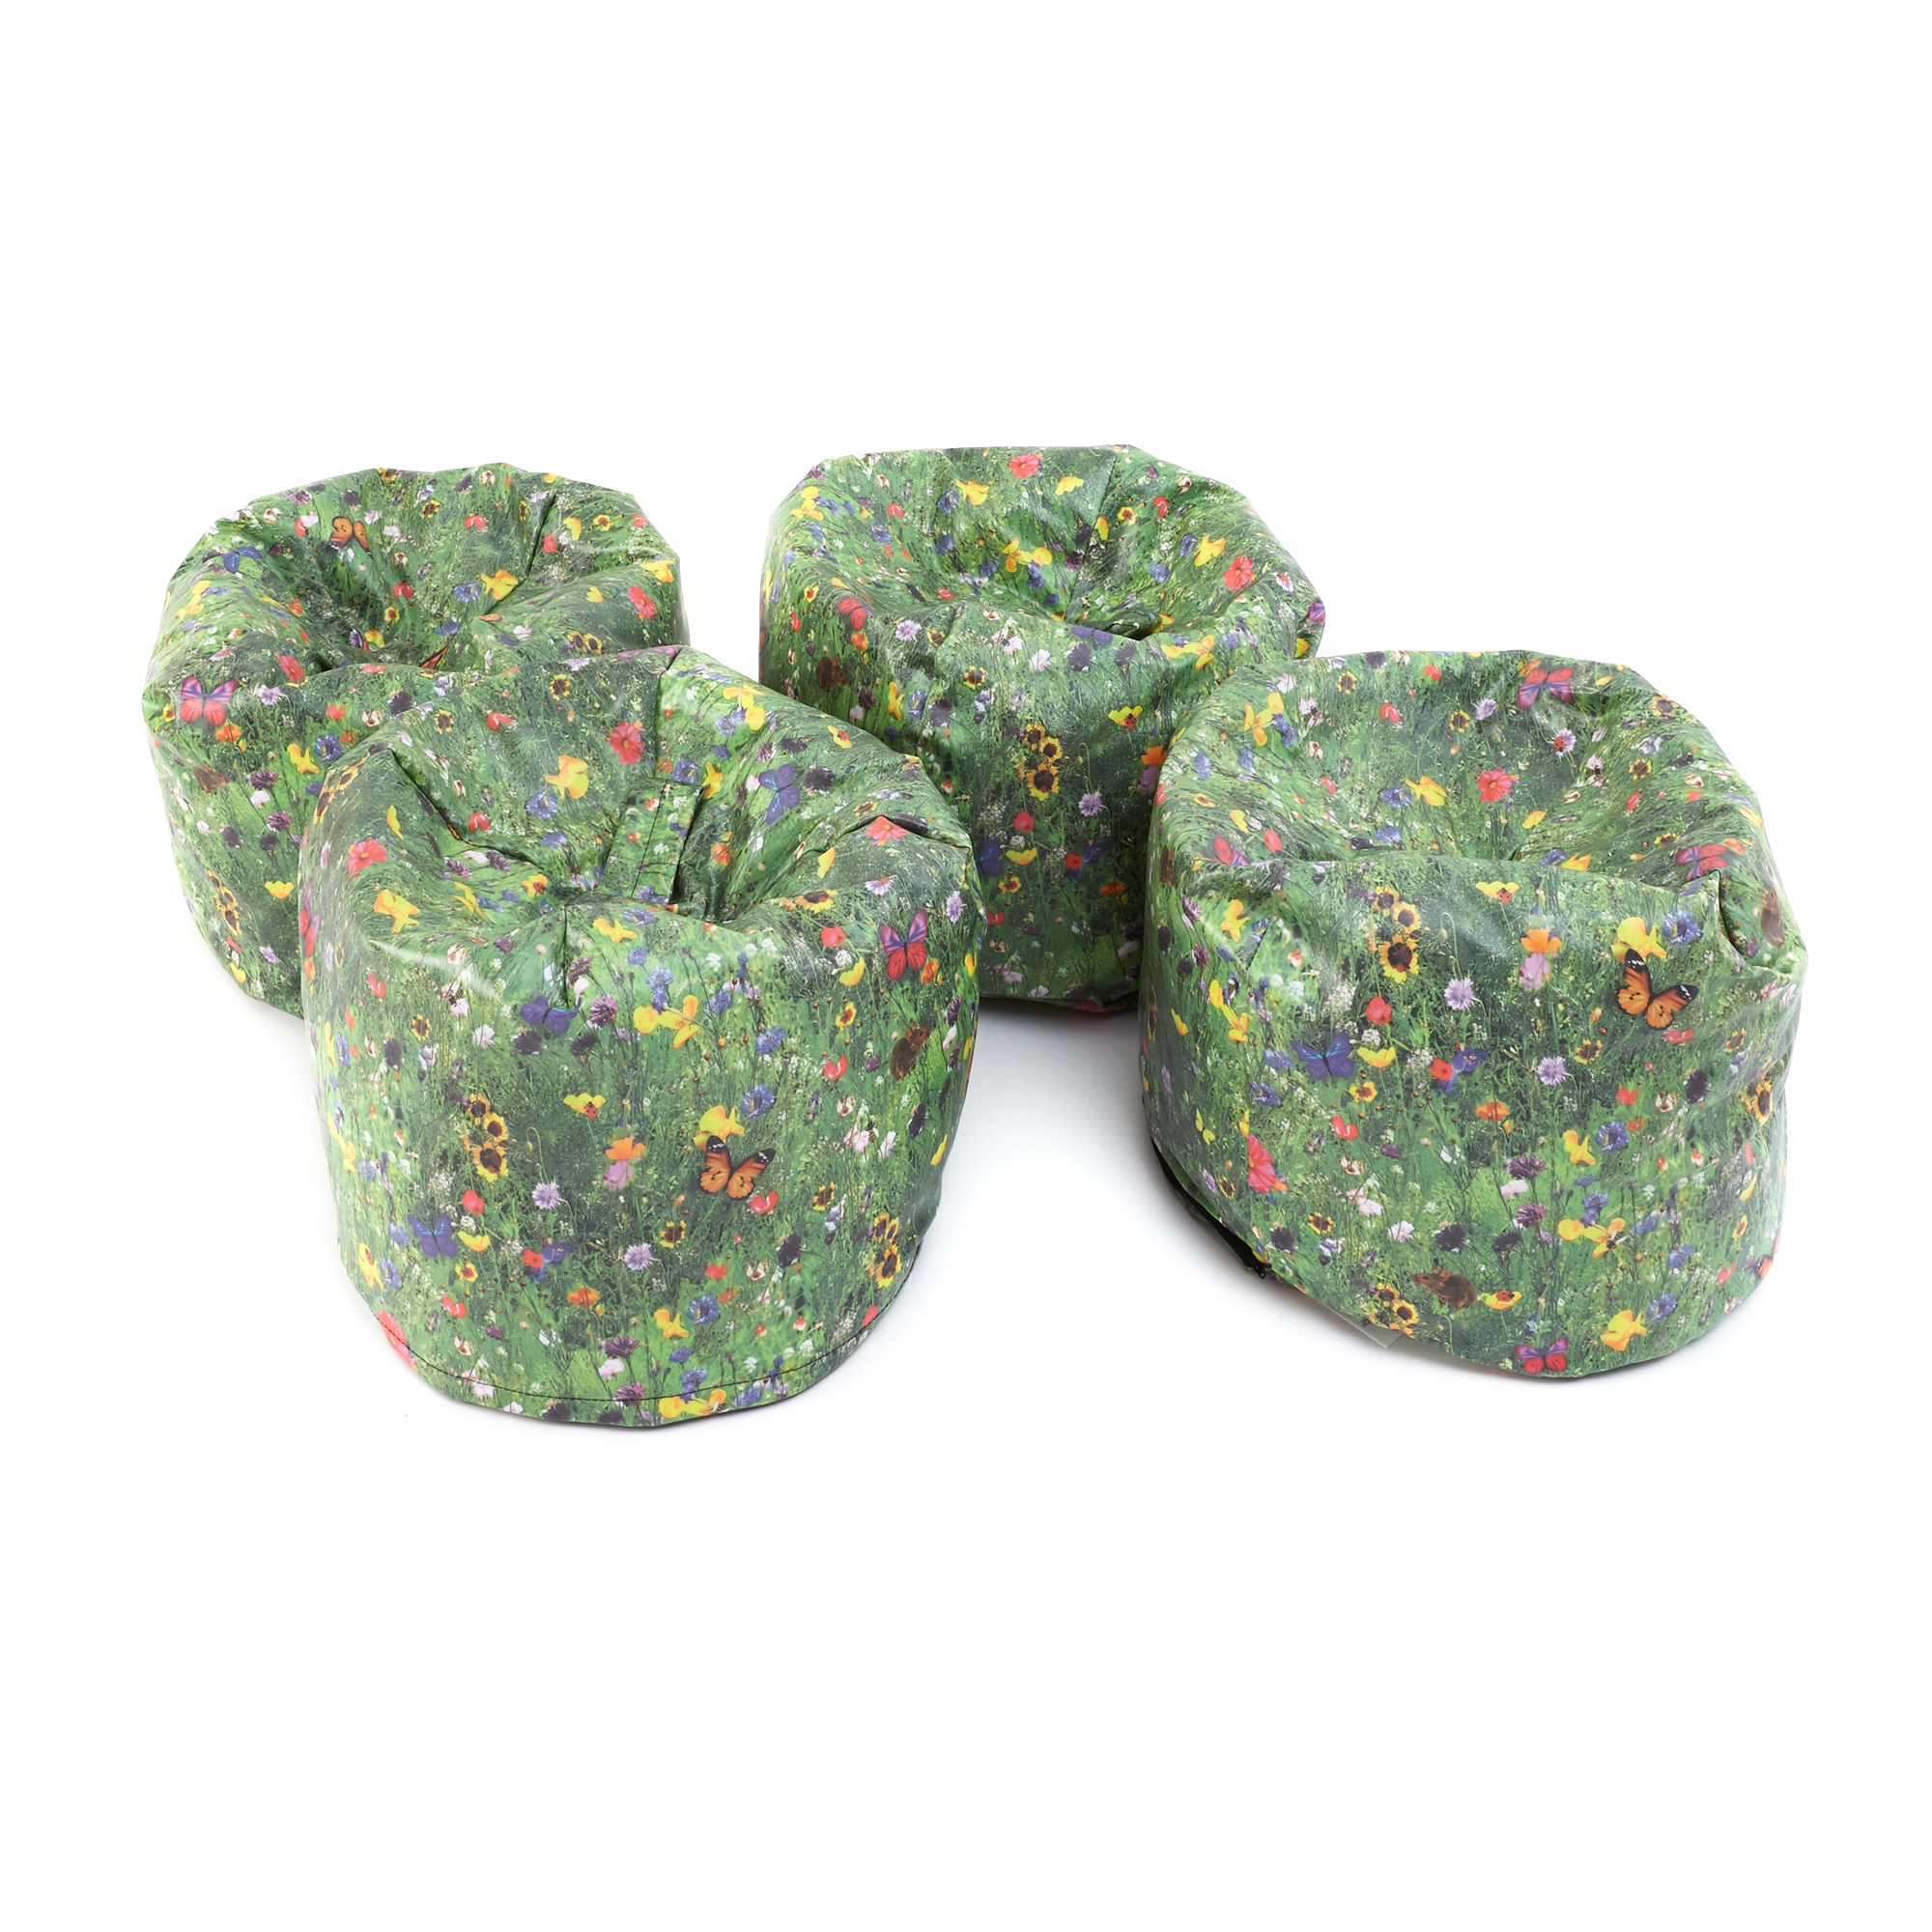 Wild Flower Textiles Wipe Clean 4 Small Beanbags